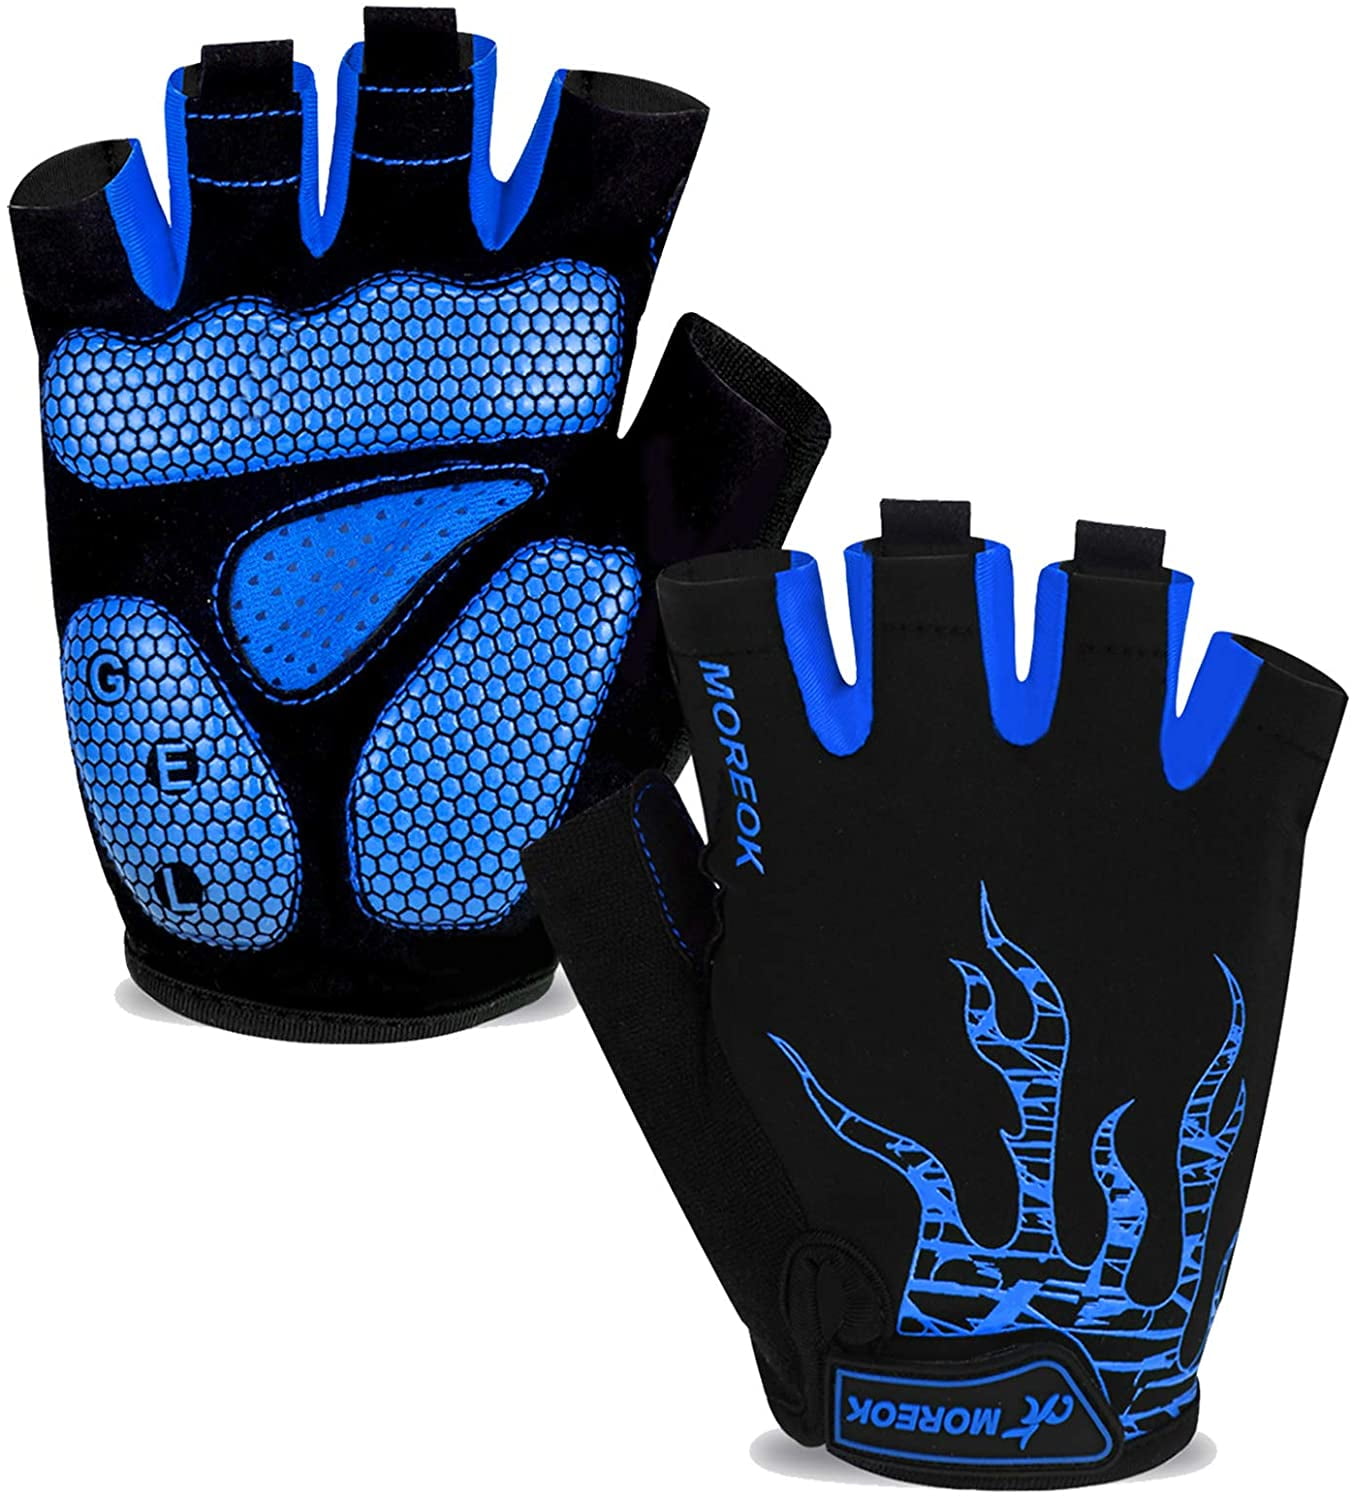 Cycling Bicycle Bike Gloves Sports Racing Riding Half Fingers Gloves Breathable 